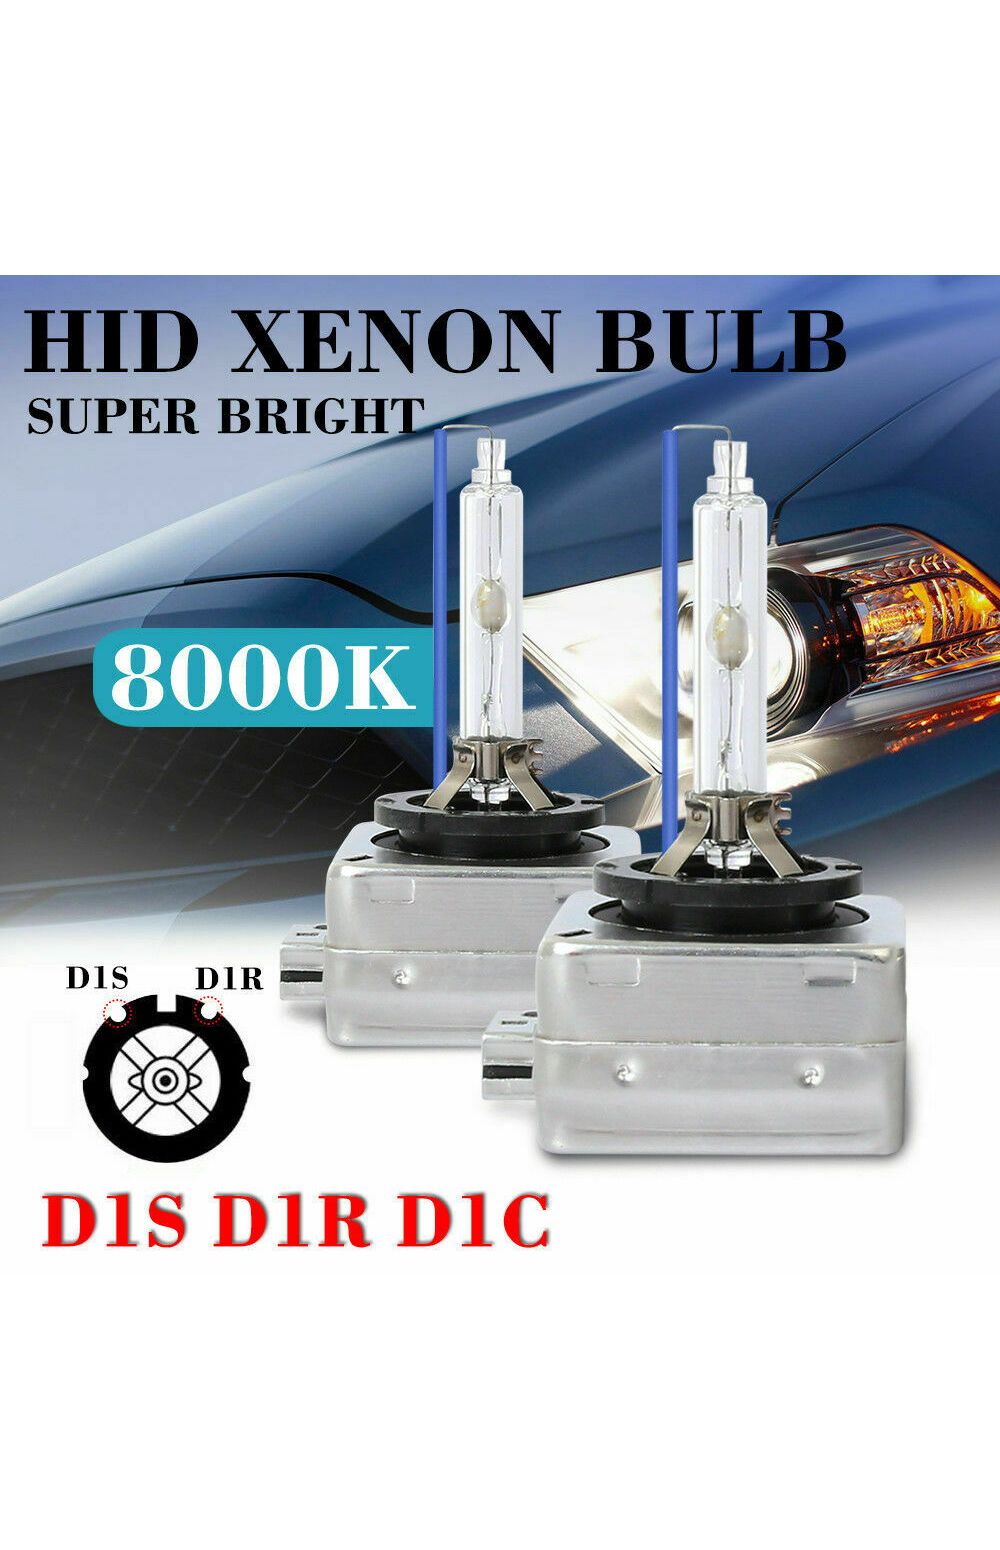 D1S HID Bulbs Factory Xenon Headlight Replacement Bulbs – hidreplacement